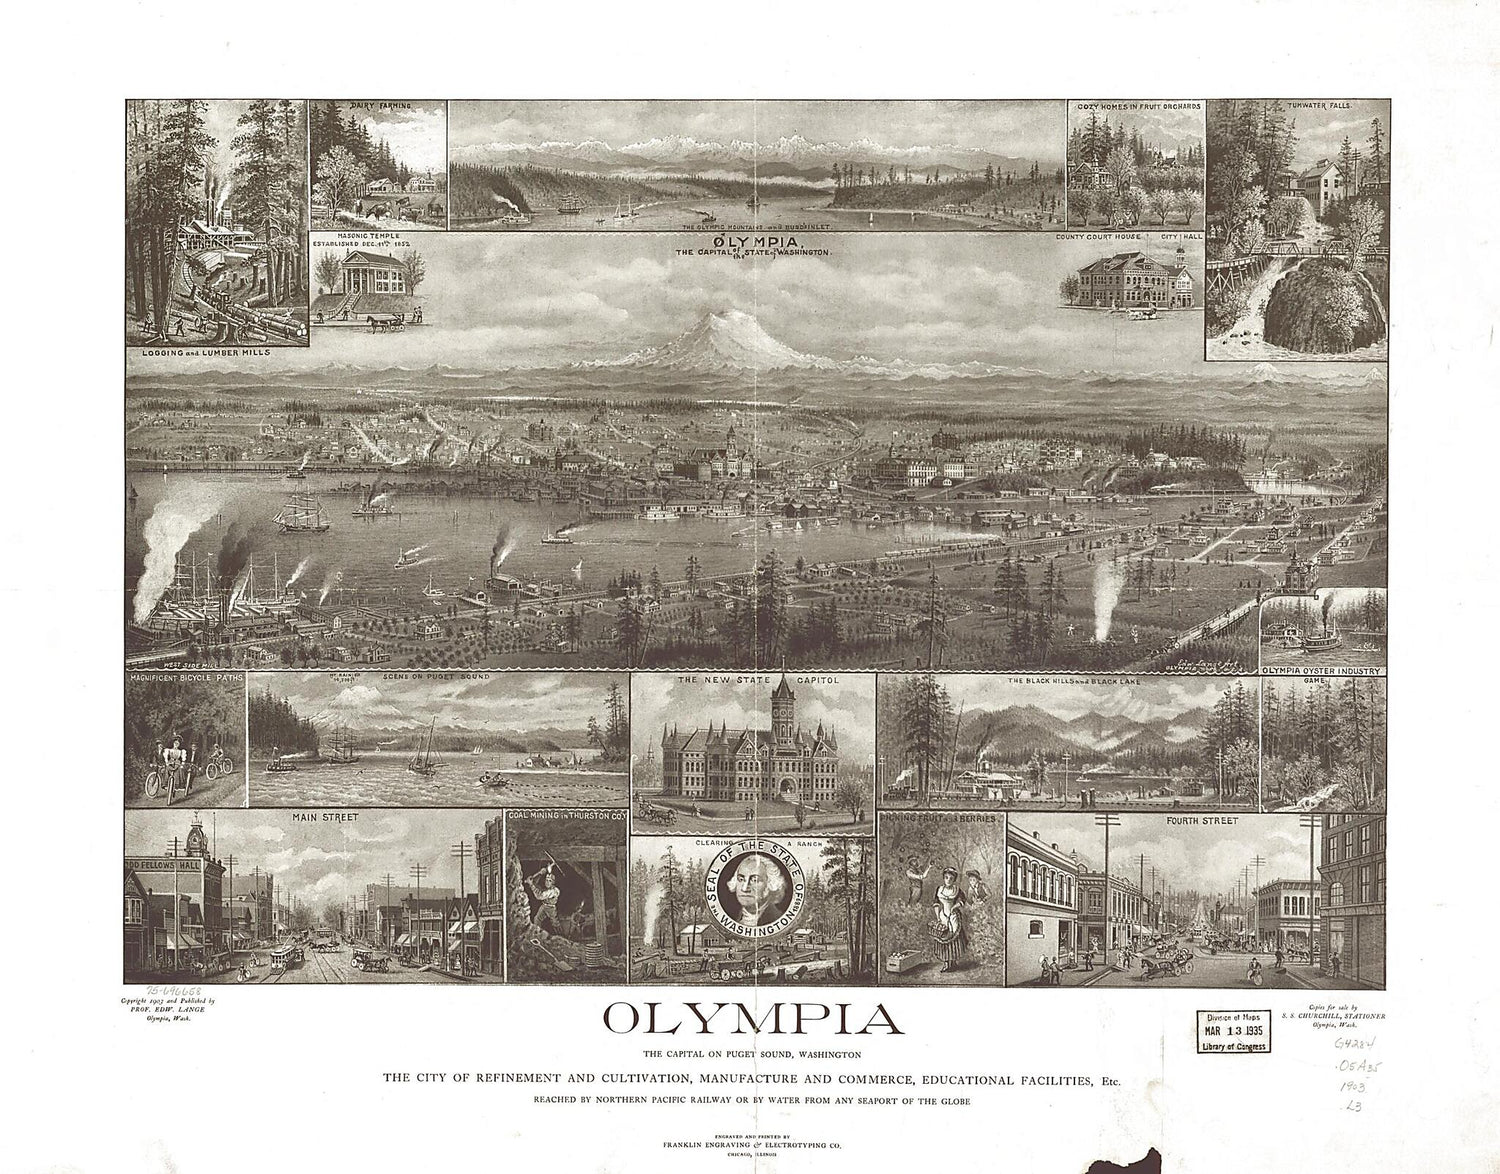 This old map of Olympia, the Capital On Puget Sound, Washington from 1903 was created by  Franklin Engraving &amp; Electrotyping Co, Edward Lange in 1903